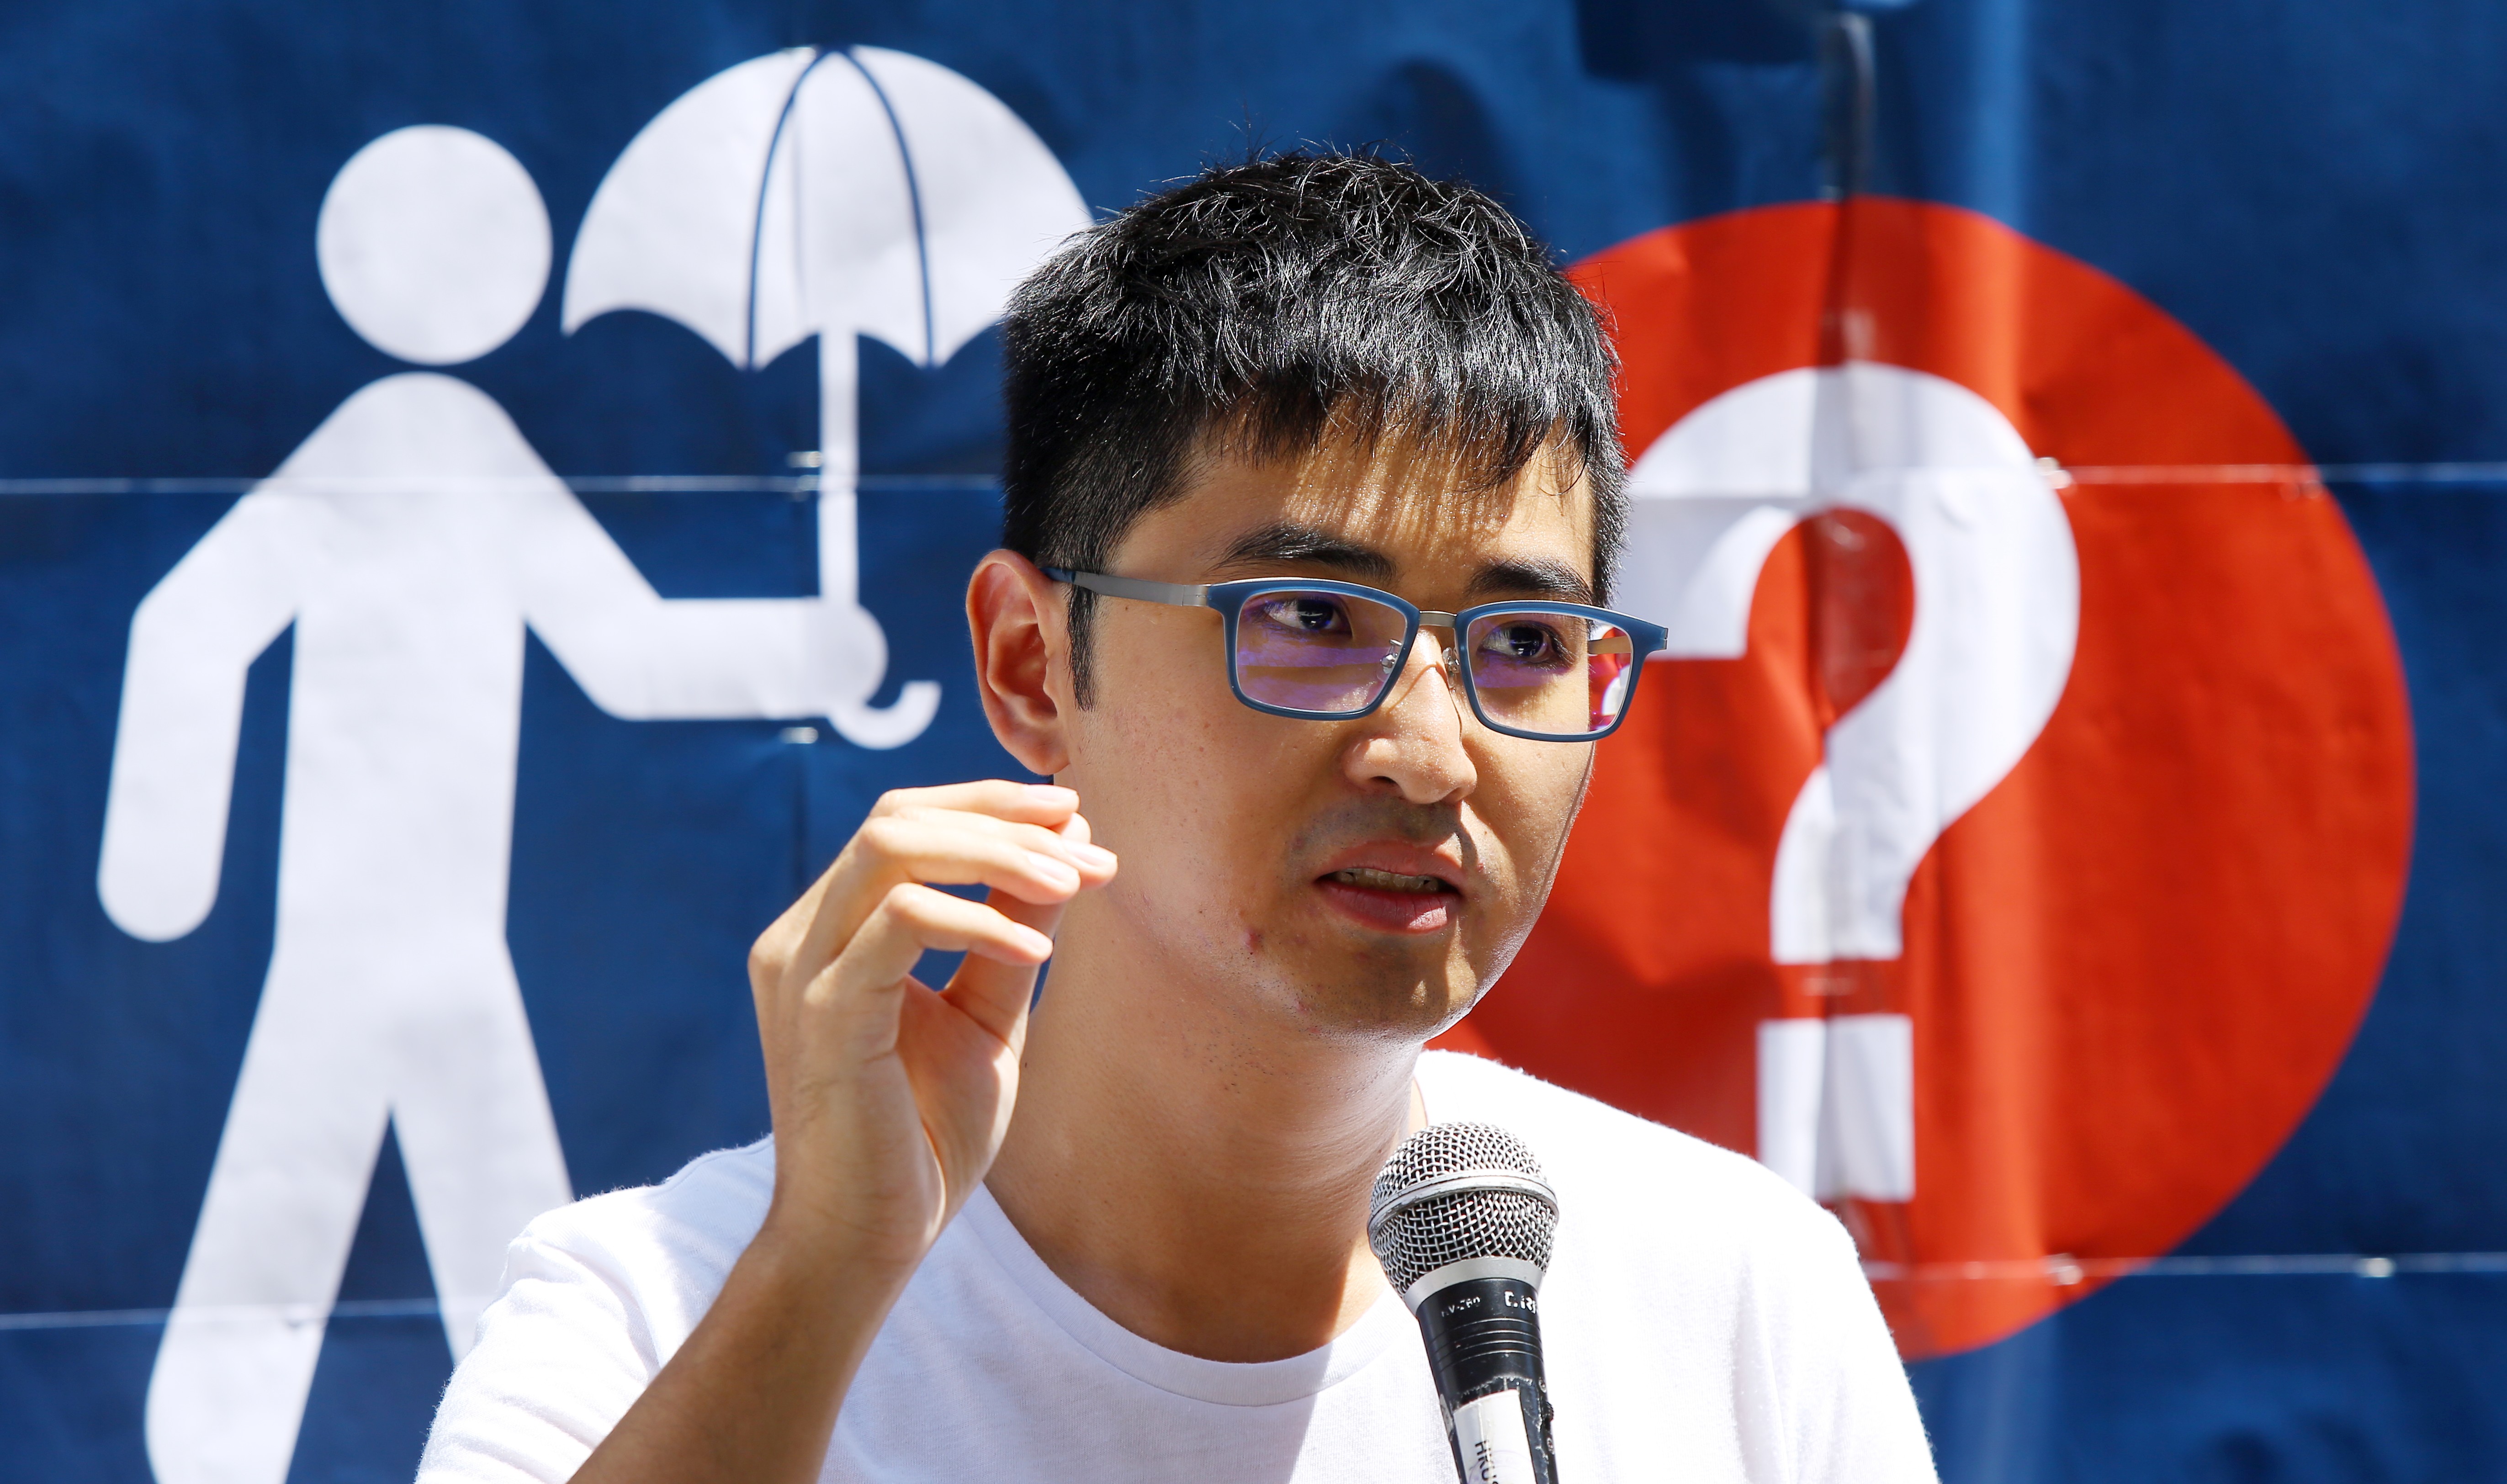 Alex Chow Yong-kang is serving time in jail for storming the government’s headquarters. Photo: Edmond So